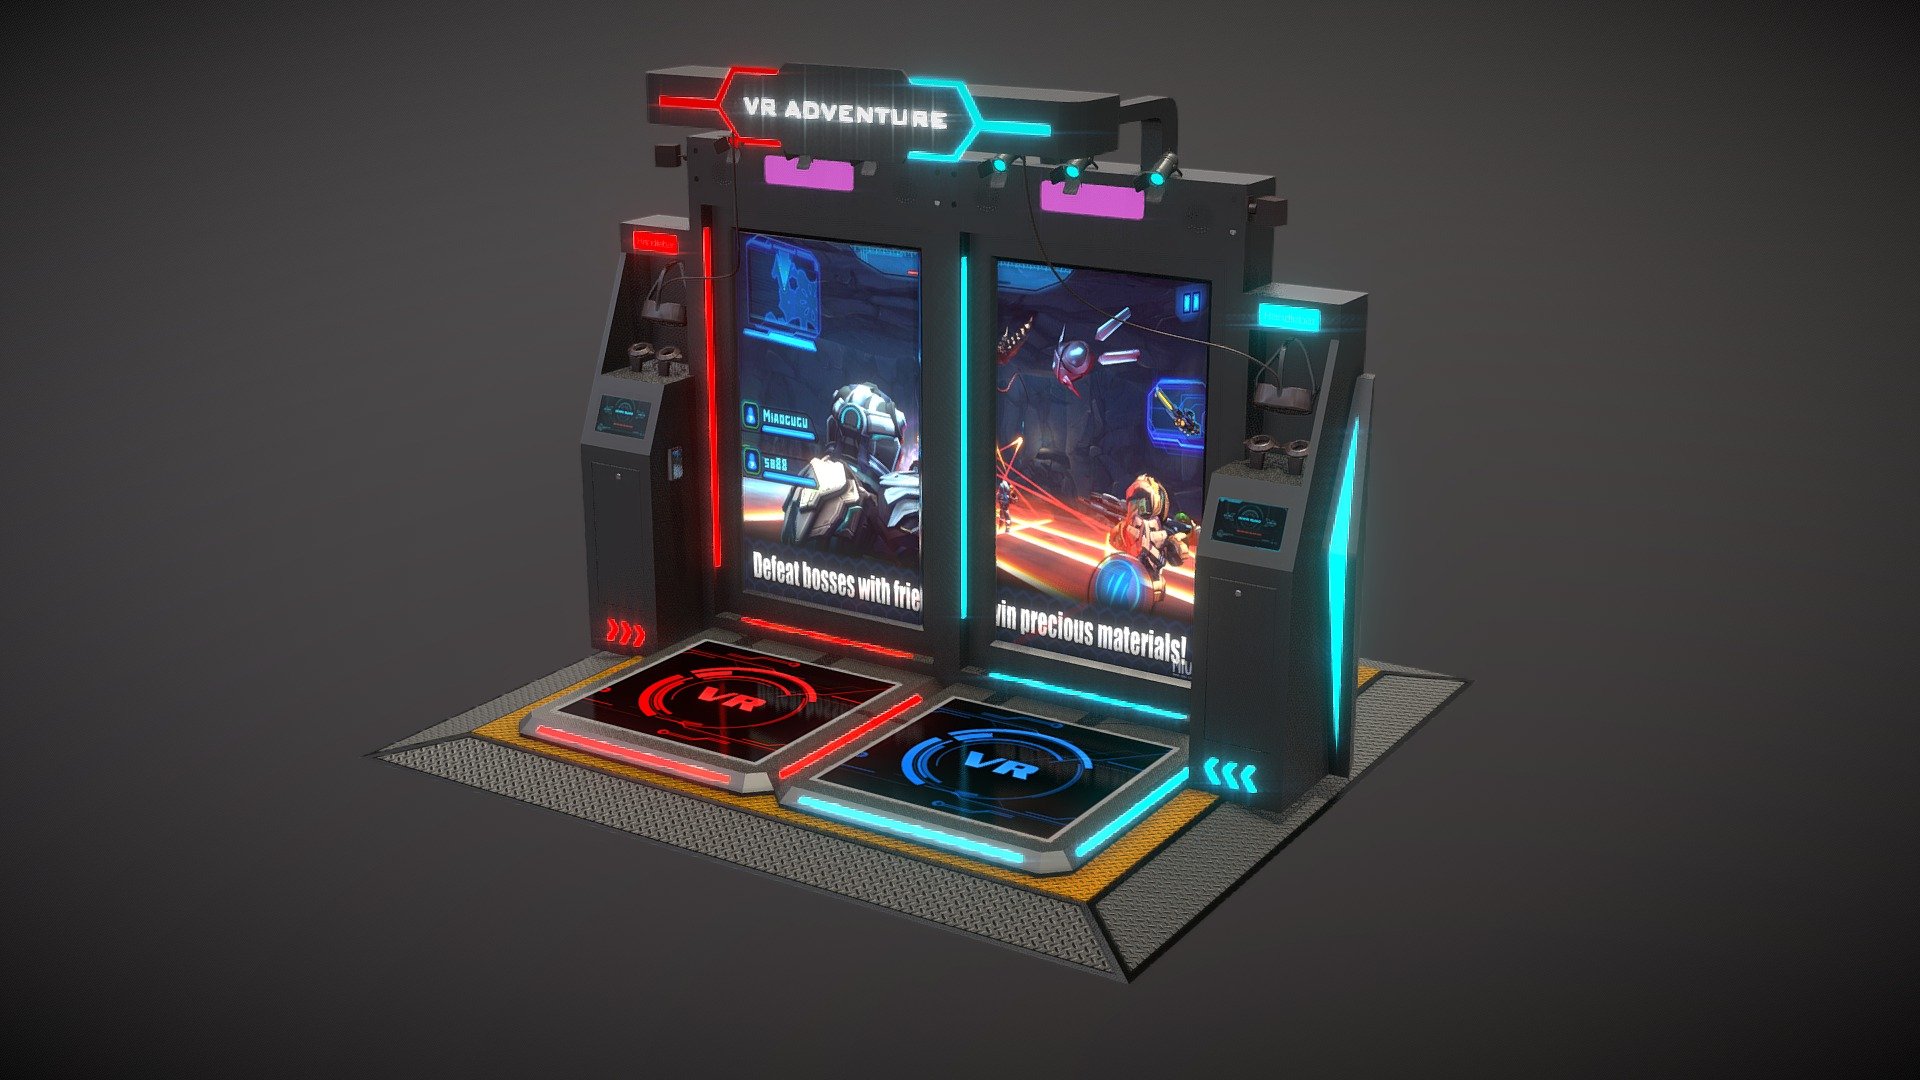 VR ADVENTURE Game Station - 3D by [7a751f8] - Sketchfab